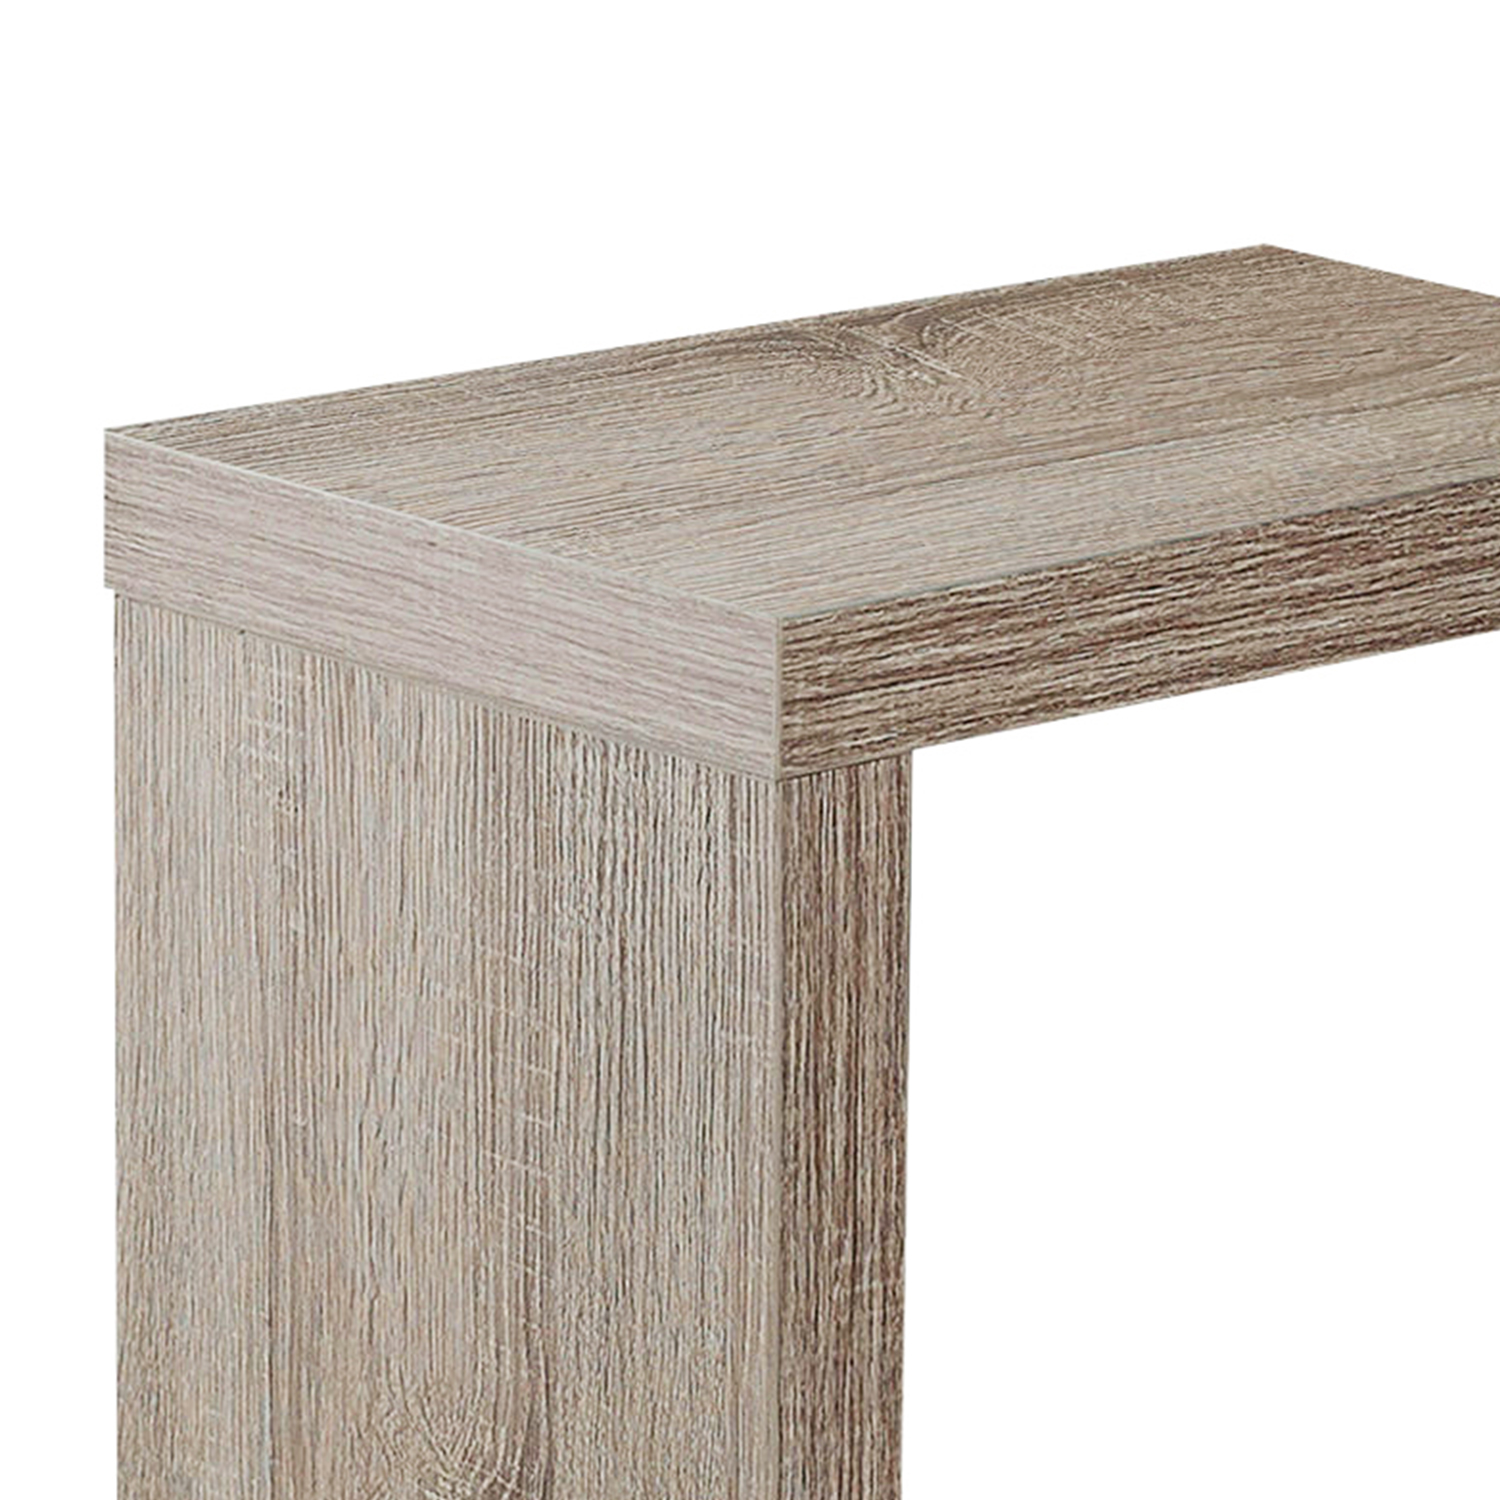 11.5" x 18" x 24" Dark Taupe Hollow Core Particle Board Accent Table